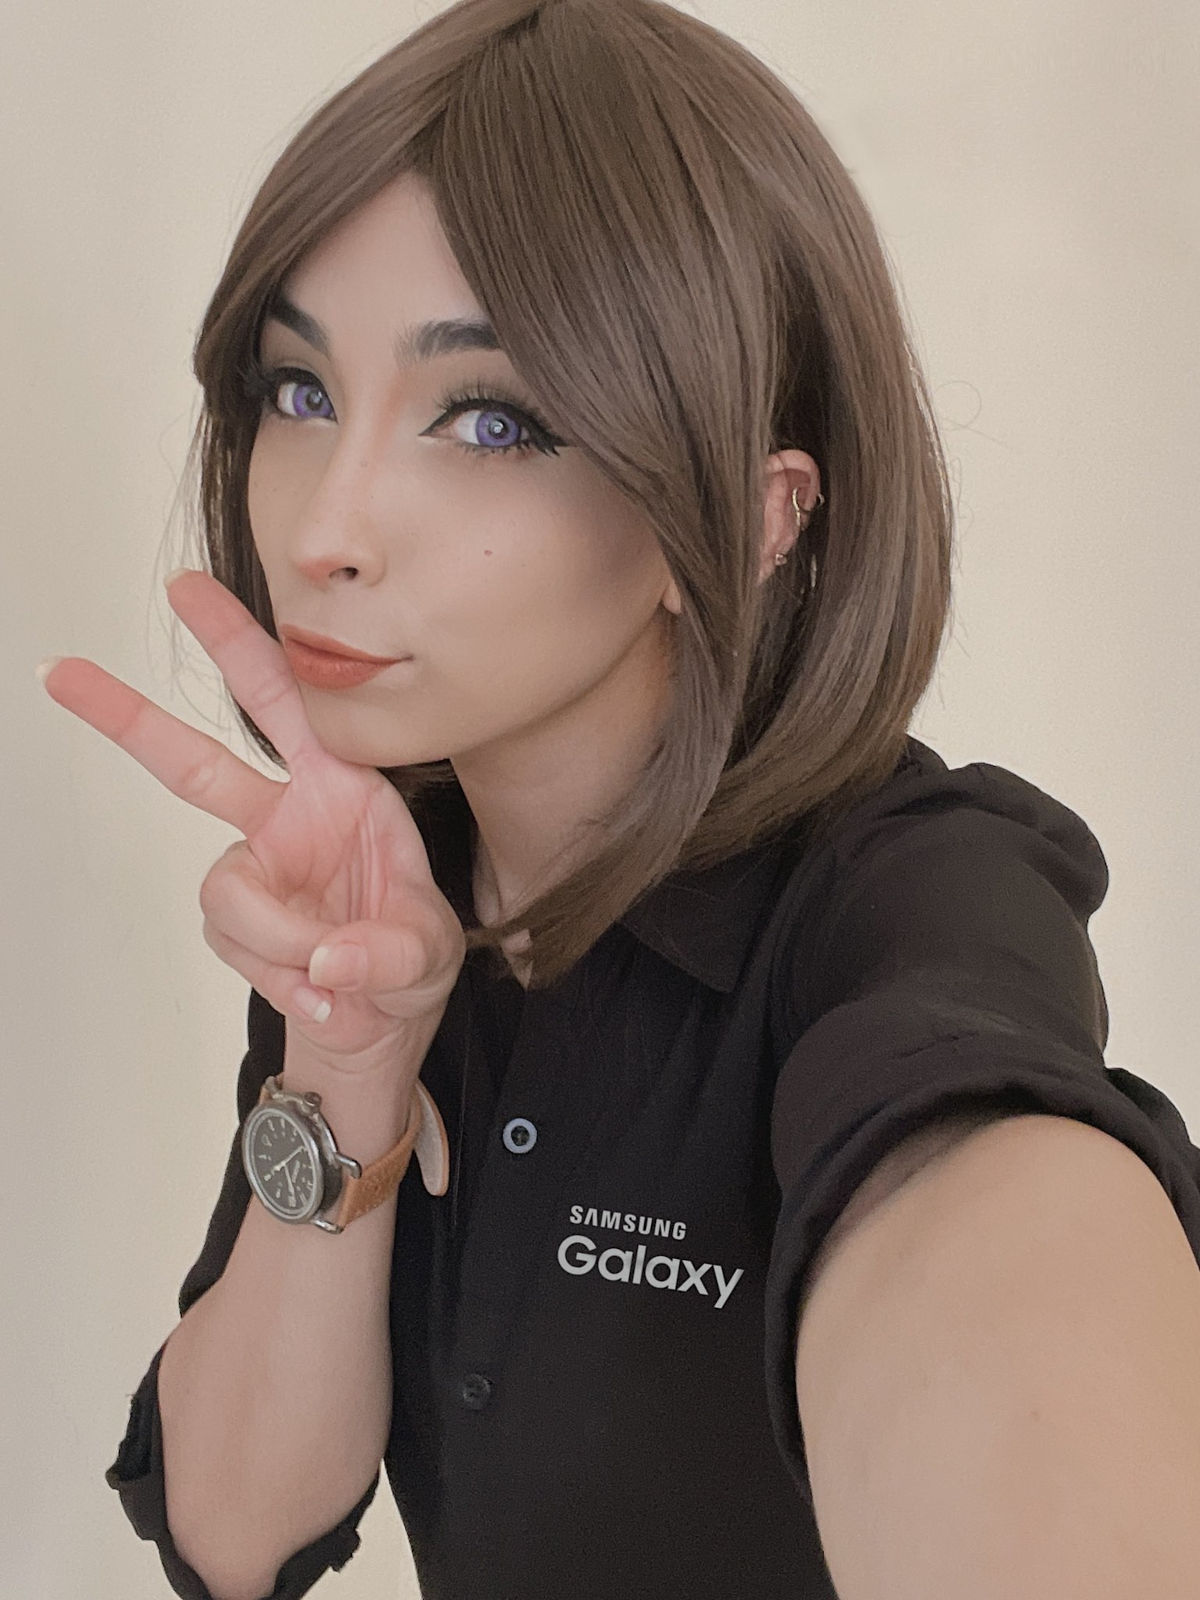 Mexican Cosplayer Plays Sam From Samsung Byo Cosplay